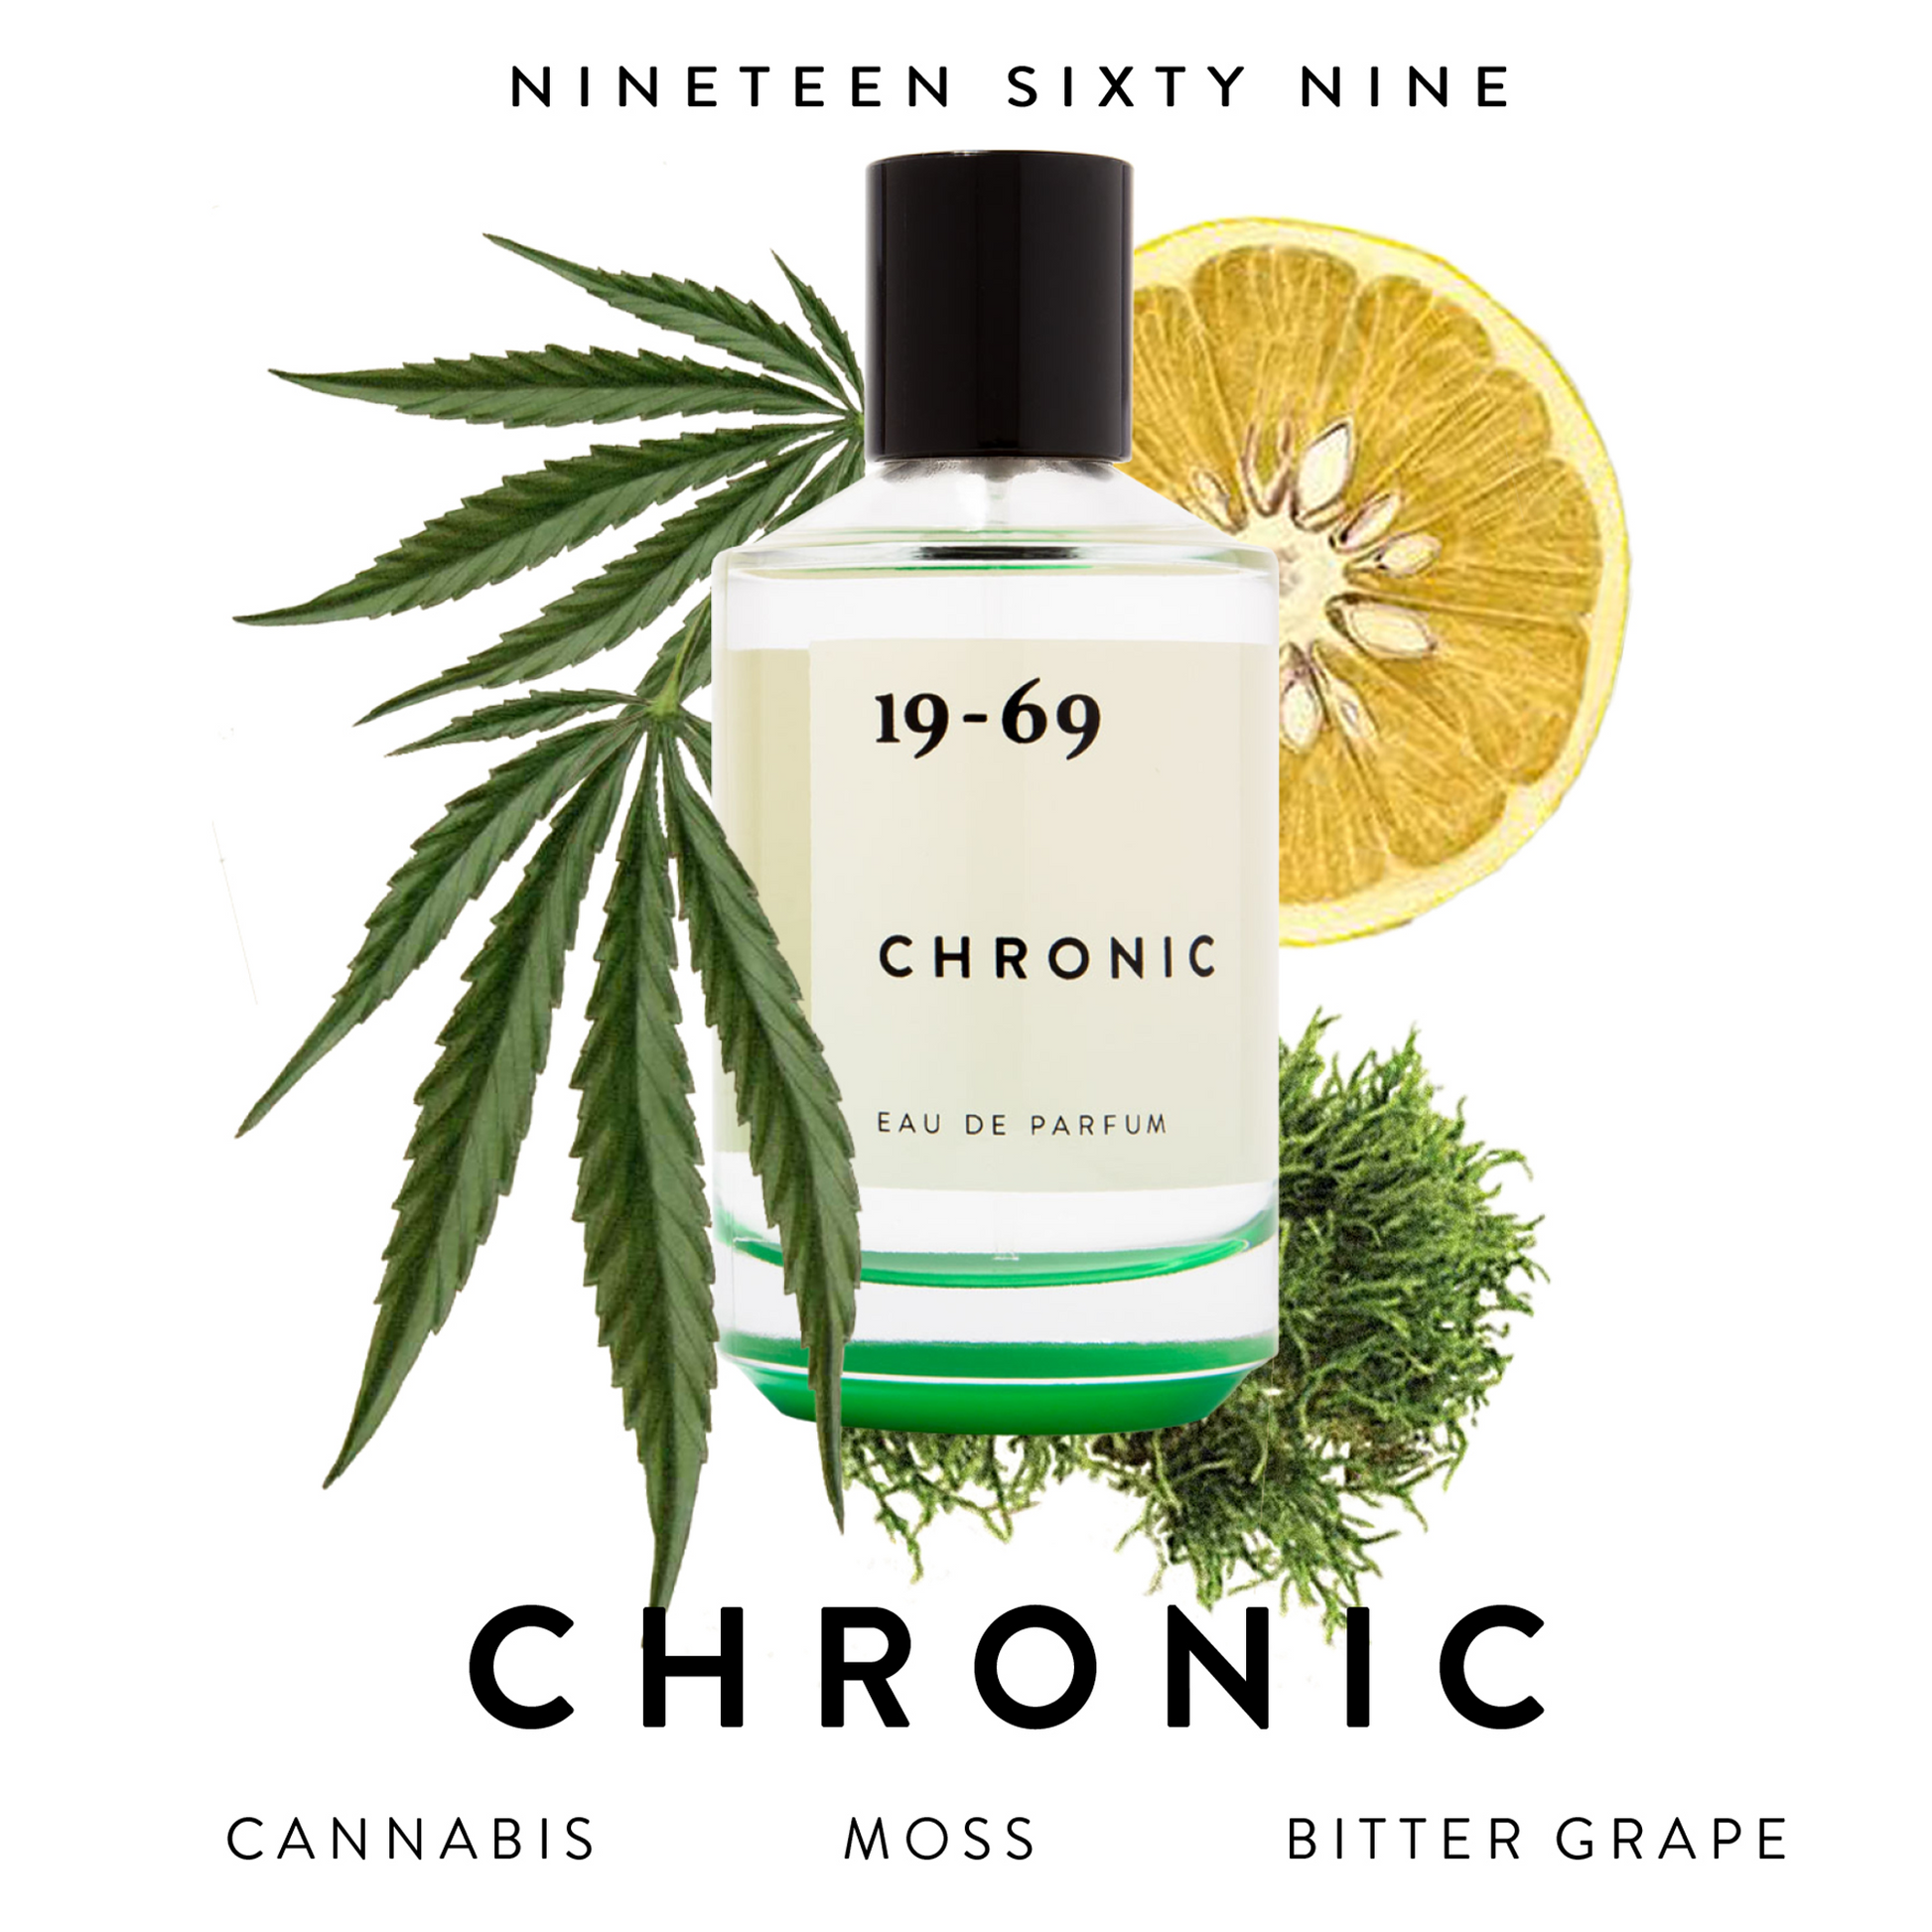 19-69 Chronic Perfume: Chronic is an acknowledgement of the cannabis cultivation in Southern California during the 90´s.  The scent is leafy, vibrant and green. Fragrance notes include Bitter Grapefruit, Cannabis Accord and Moss. All 19-69 fragrances are suitable for any gender.